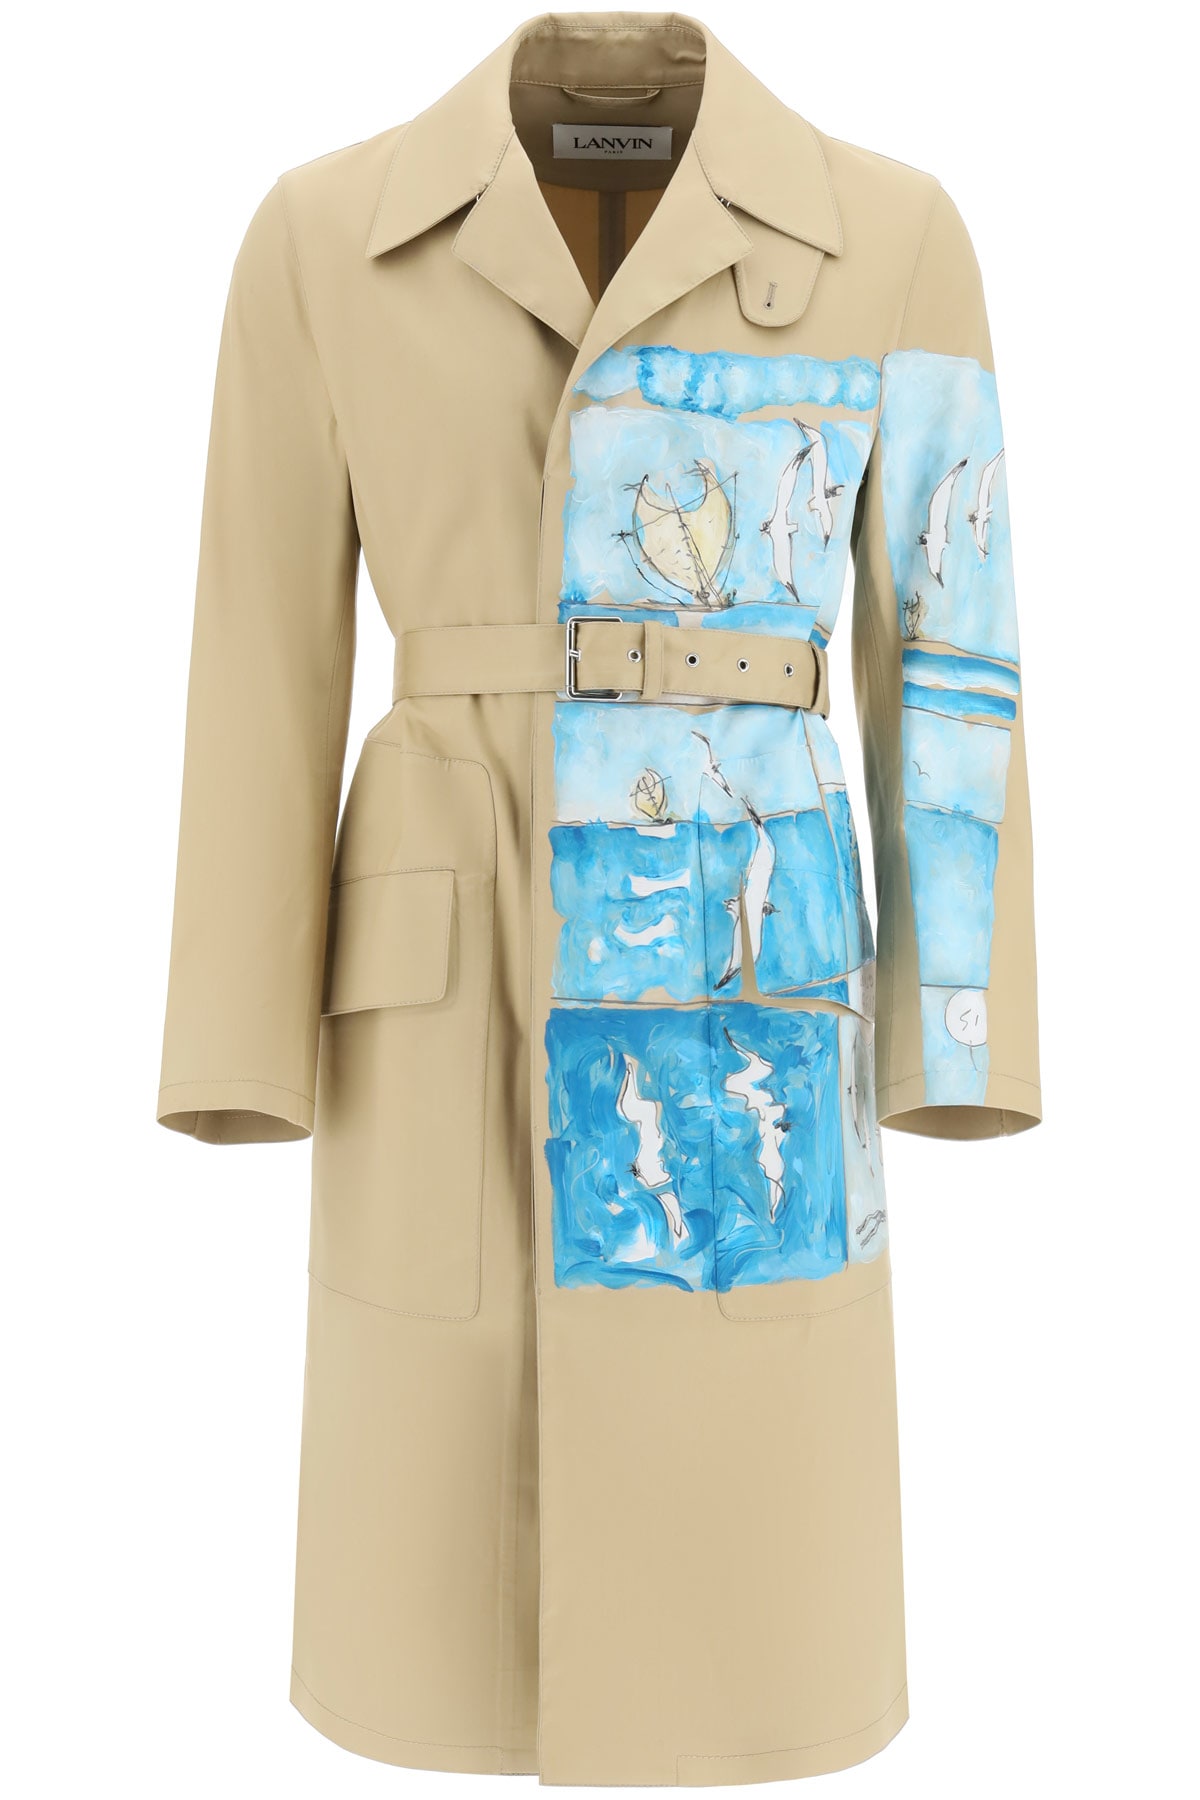 LanvinLanvin Hand Painted Trench Coat | DailyMail